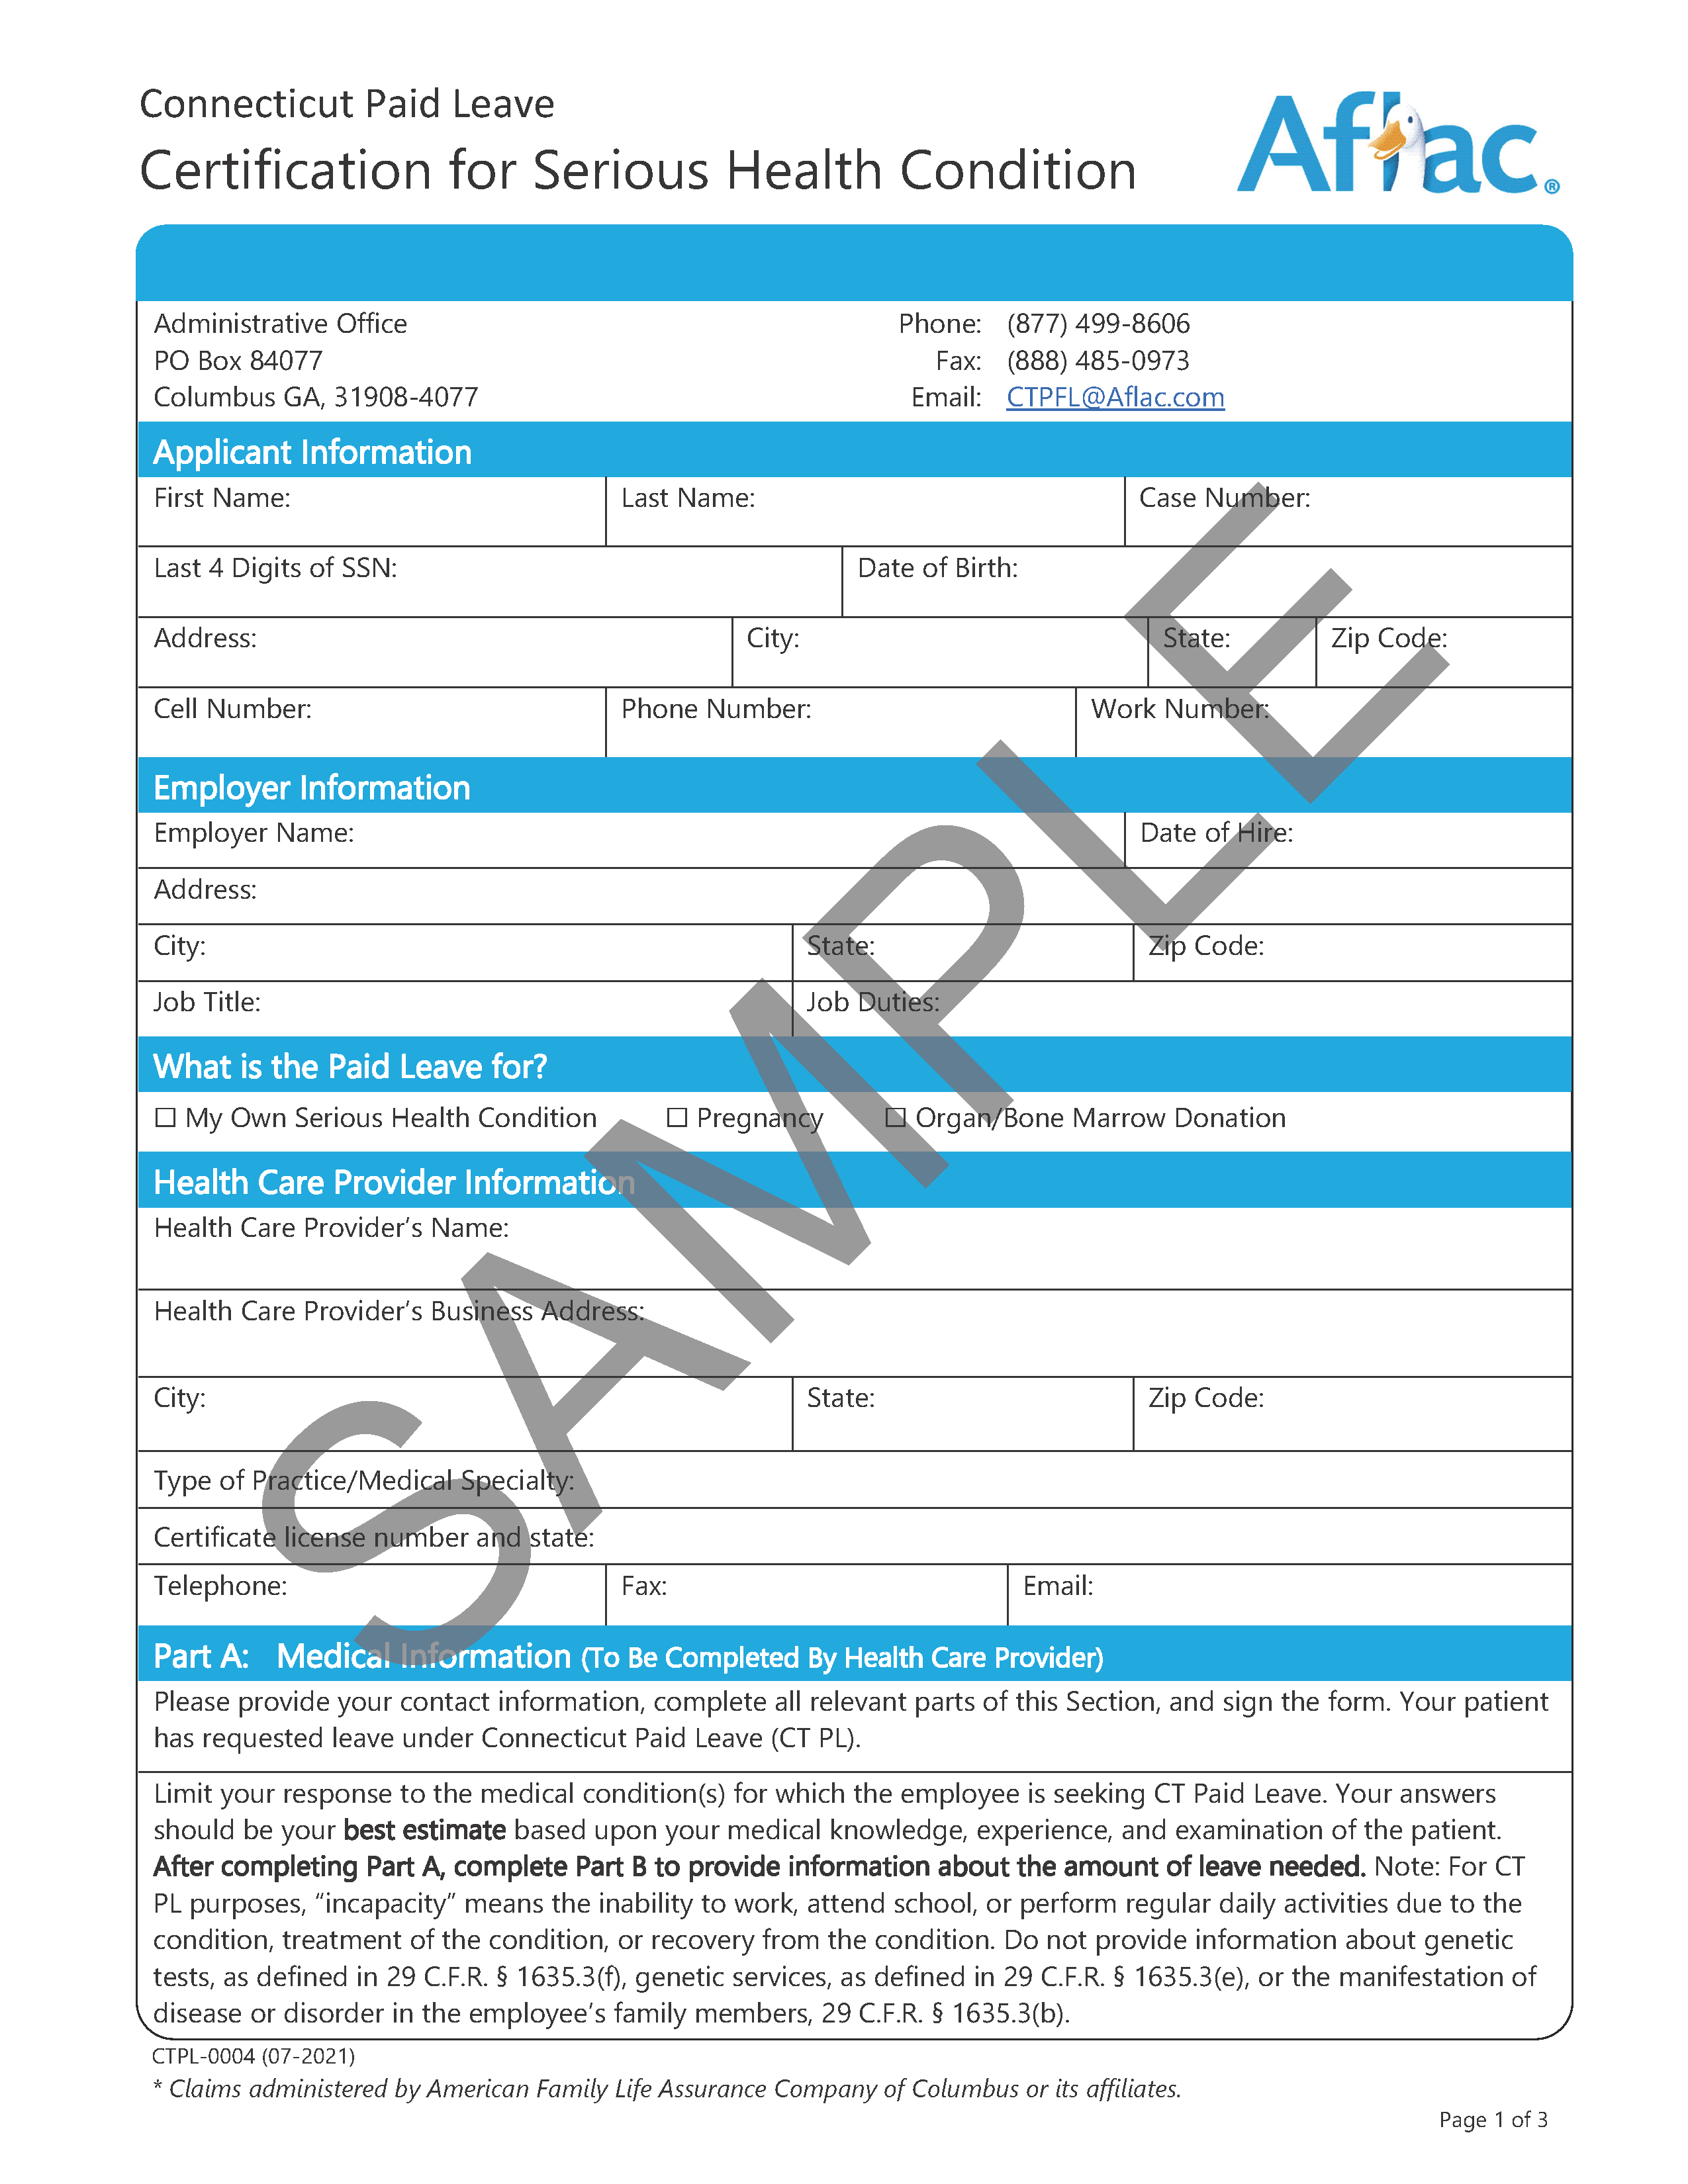 Sample Certification for Serious Health Condition form